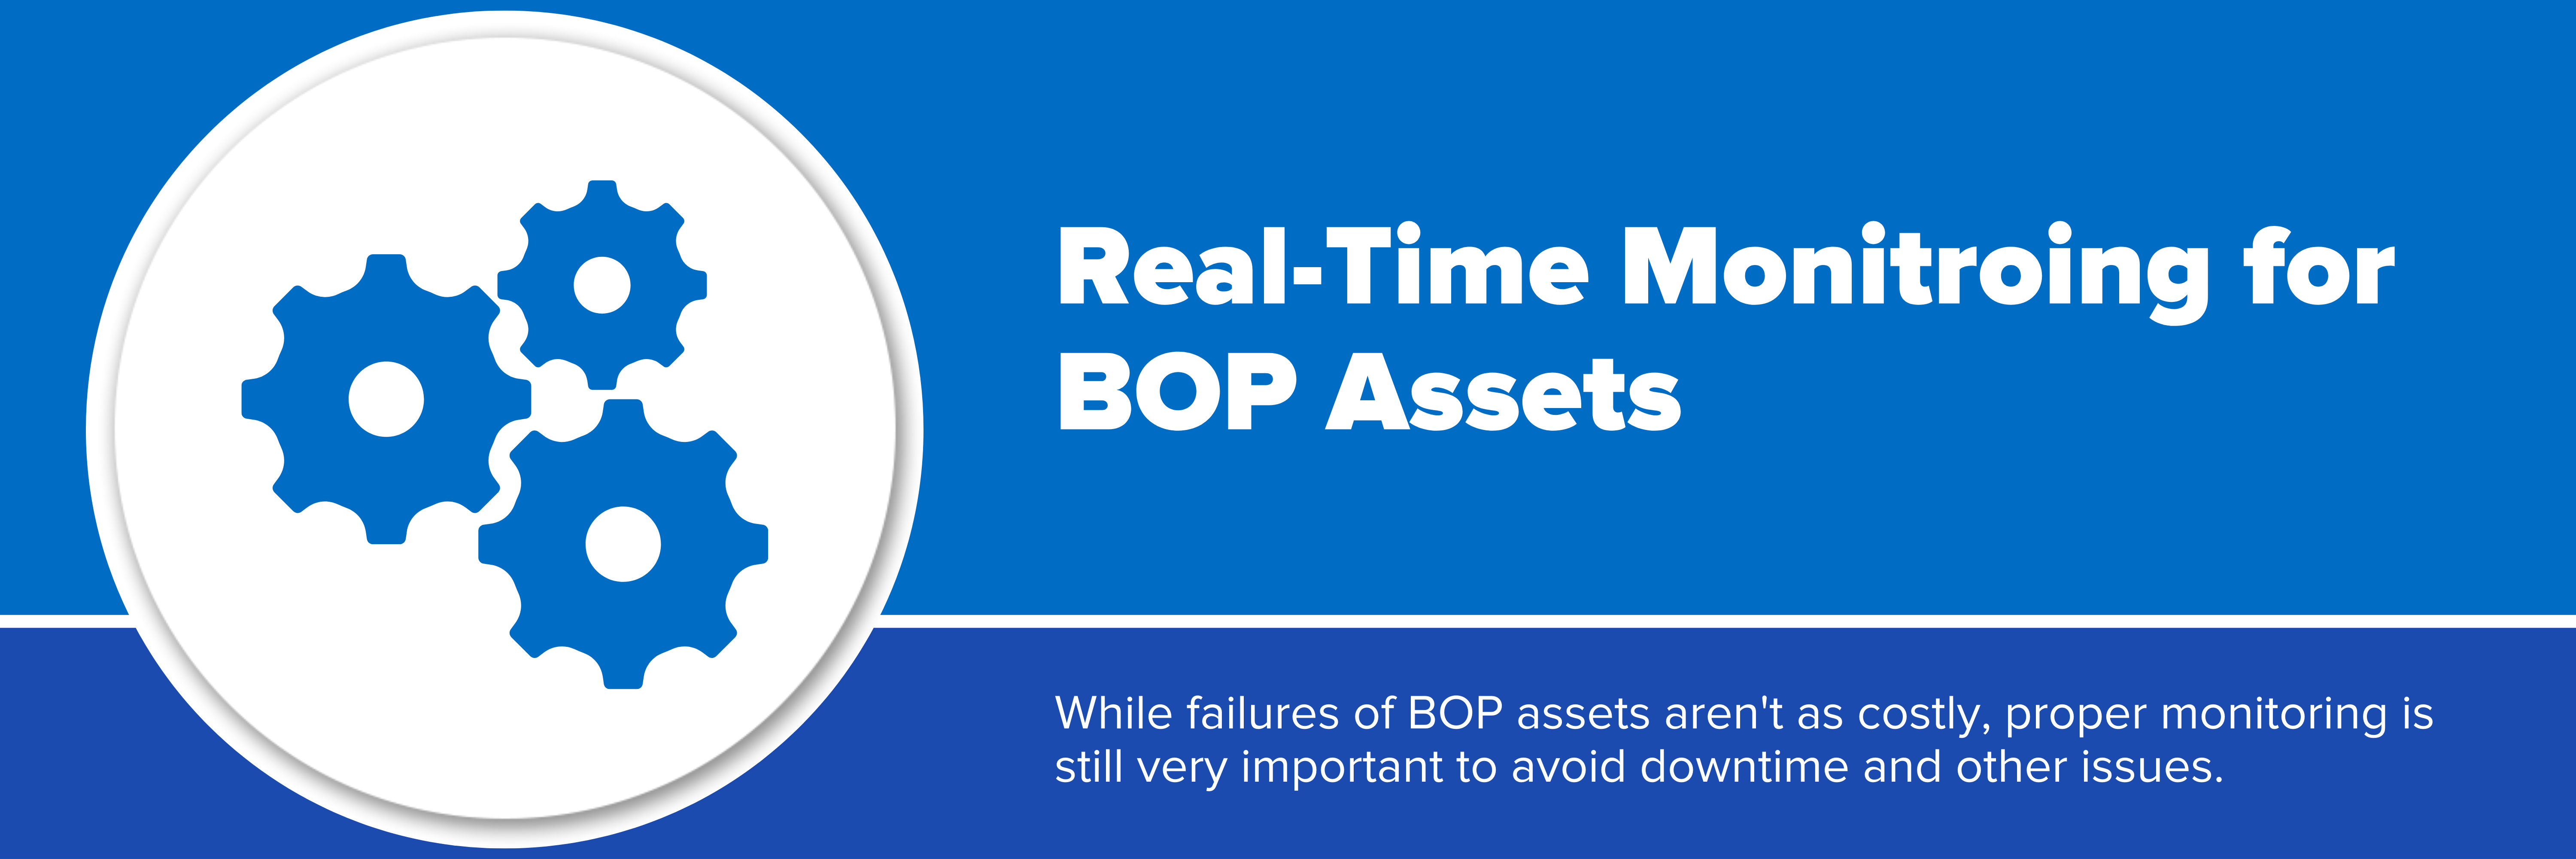 Header image with text "Real-Time Monitoring for BOP Assets"